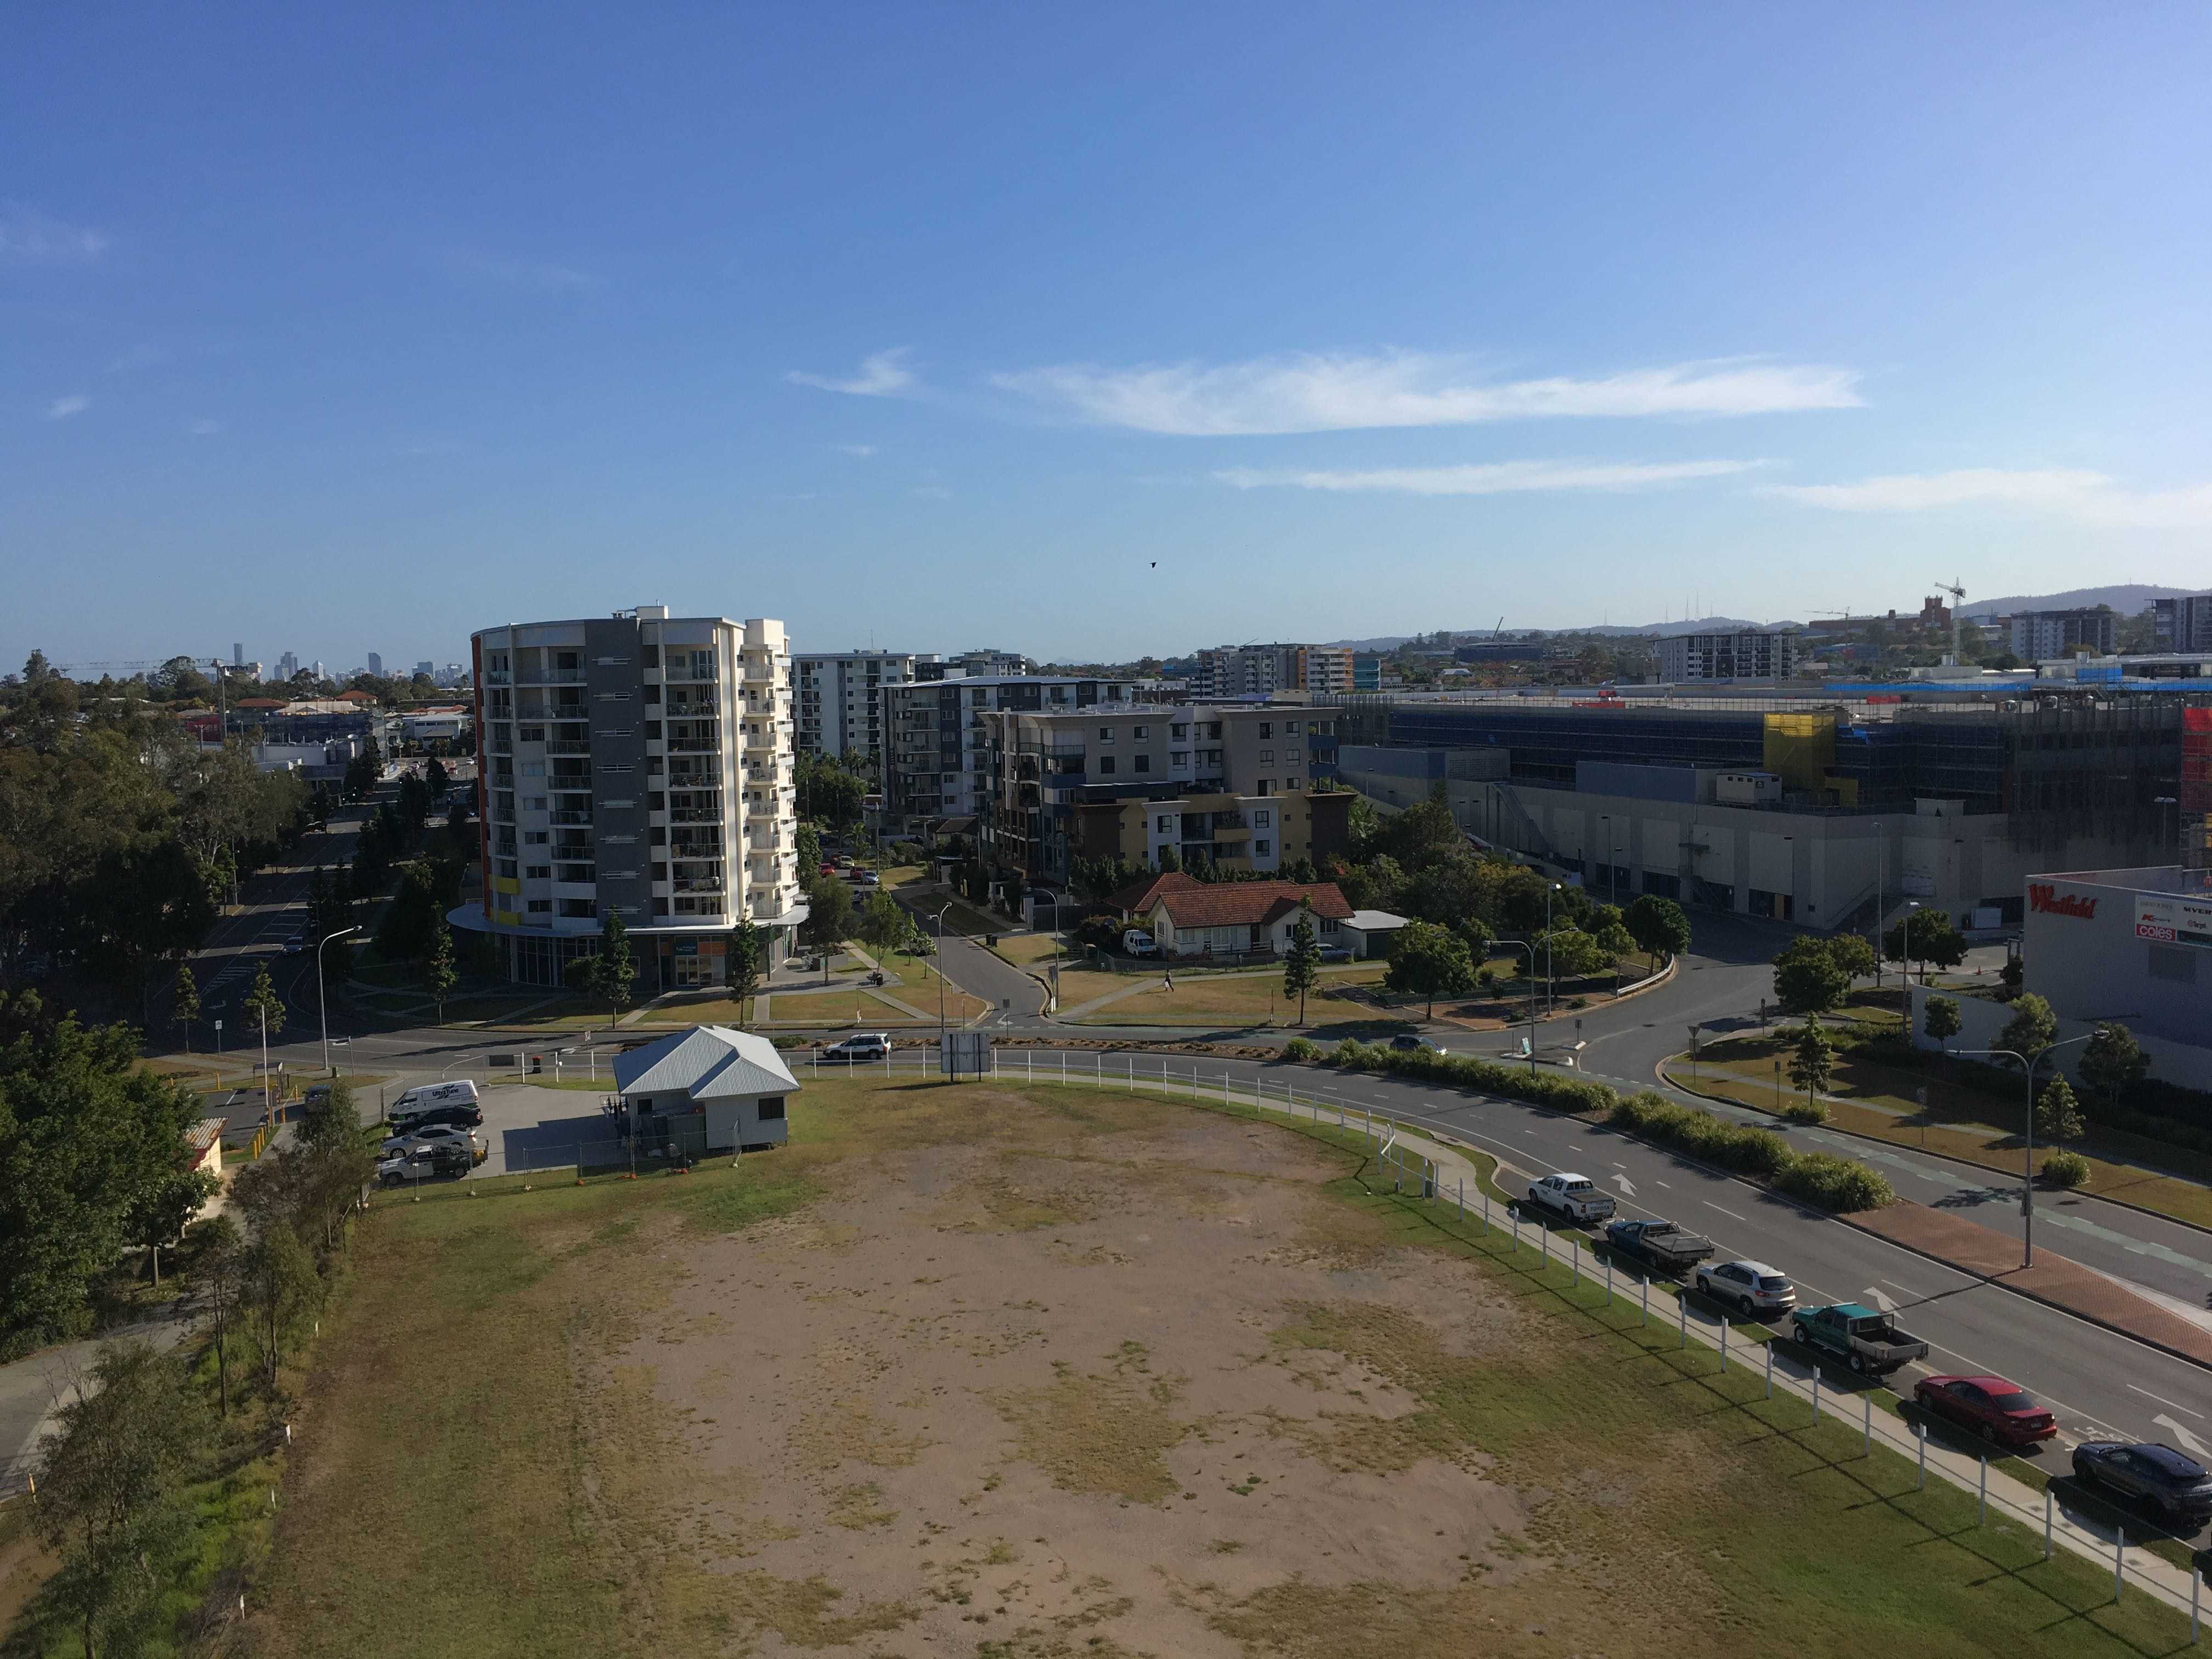 Photo of the neighbouring vacant lot with Westfield Chermside visible on the right. Photo taken by Property Mash 2/11/16.